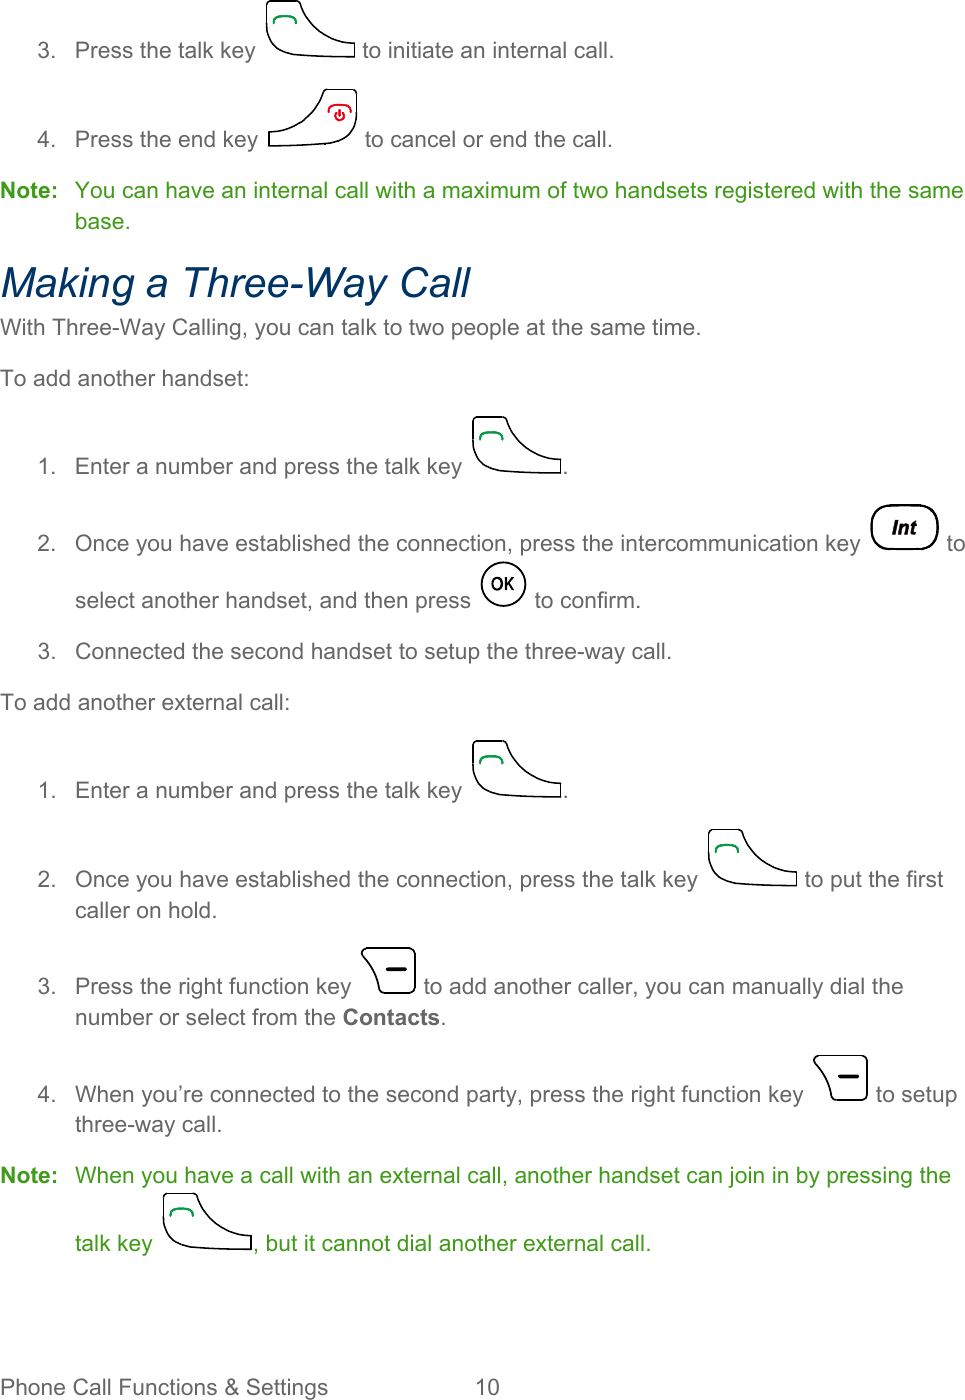 Phone Call Functions &amp; Settings 10   3.  Press the talk key   to initiate an internal call. 4.  Press the end key   to cancel or end the call. Note: You can have an internal call with a maximum of two handsets registered with the same base. Making a Three-Way Call With Three-Way Calling, you can talk to two people at the same time. To add another handset: 1. Enter a number and press the talk key  . 2. Once you have established the connection, press the intercommunication key   to select another handset, and then press   to confirm. 3.  Connected the second handset to setup the three-way call. To add another external call: 1. Enter a number and press the talk key  . 2. Once you have established the connection, press the talk key   to put the first caller on hold. 3.  Press the right function key   to add another caller, you can manually dial the number or select from the Contacts. 4. When you’re connected to the second party, press the right function key   to setup three-way call. Note: When you have a call with an external call, another handset can join in by pressing the talk key  , but it cannot dial another external call. 